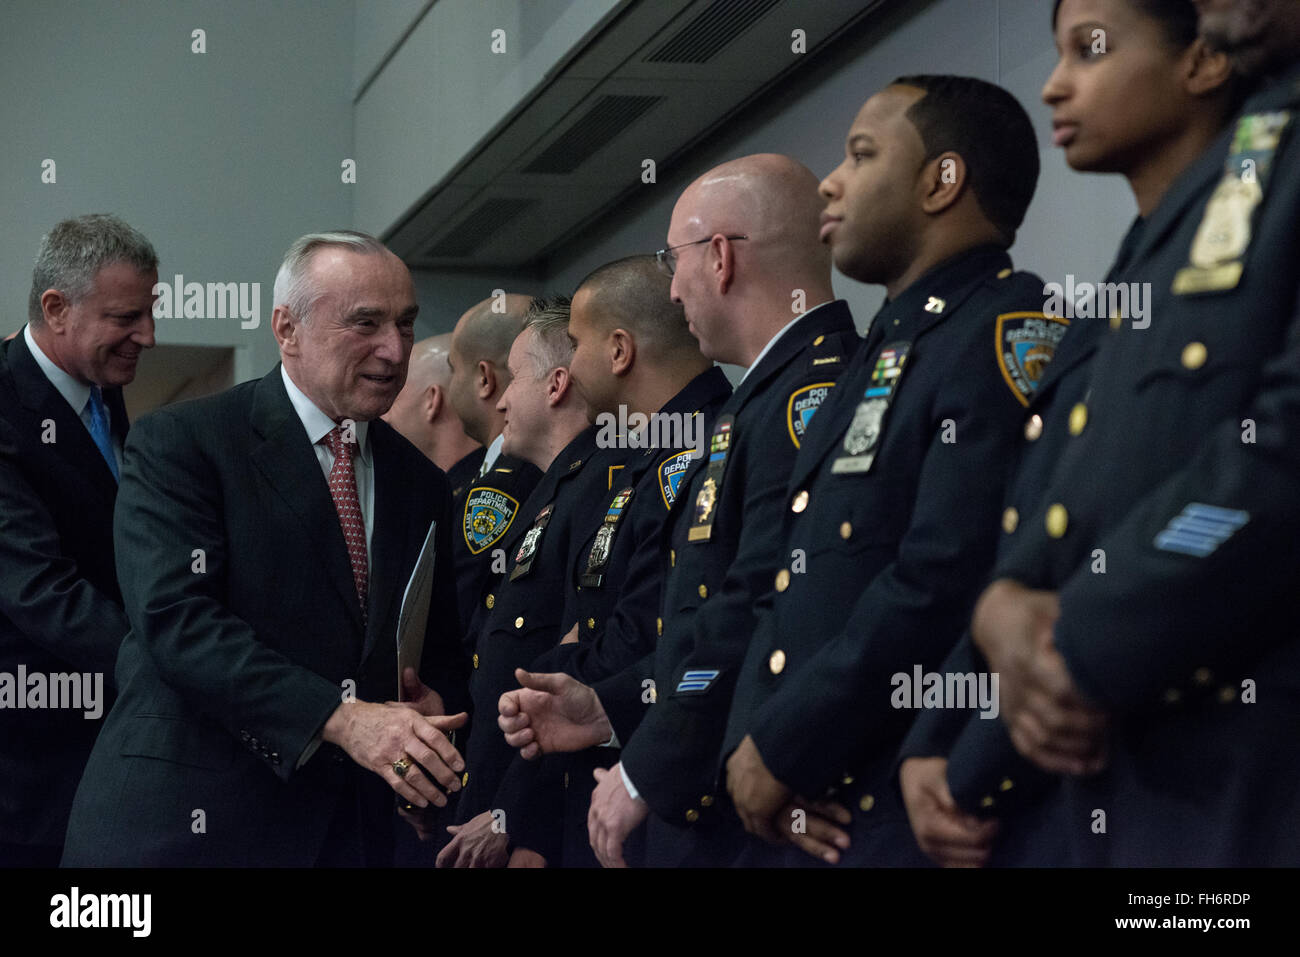 New York, United States. 23rd Feb, 2016. Commissioner Bratton (left) greets a line of NYPD officers on hand for the briefing who had used the new department communications tools. NYC Mayor Bill de Blasio and Police Commissioner William Bratton held a press briefing at One Police Plaza, the headquarters of the NYPD, to announce the launch of 'CompStat 2.0,' a new system for both publicly sharing crime data and enabling much accelerated distribution of vital police information resources among officers in the field. Credit:  Albin Lohr-Jones/Pacific Press/Alamy Live News Stock Photo